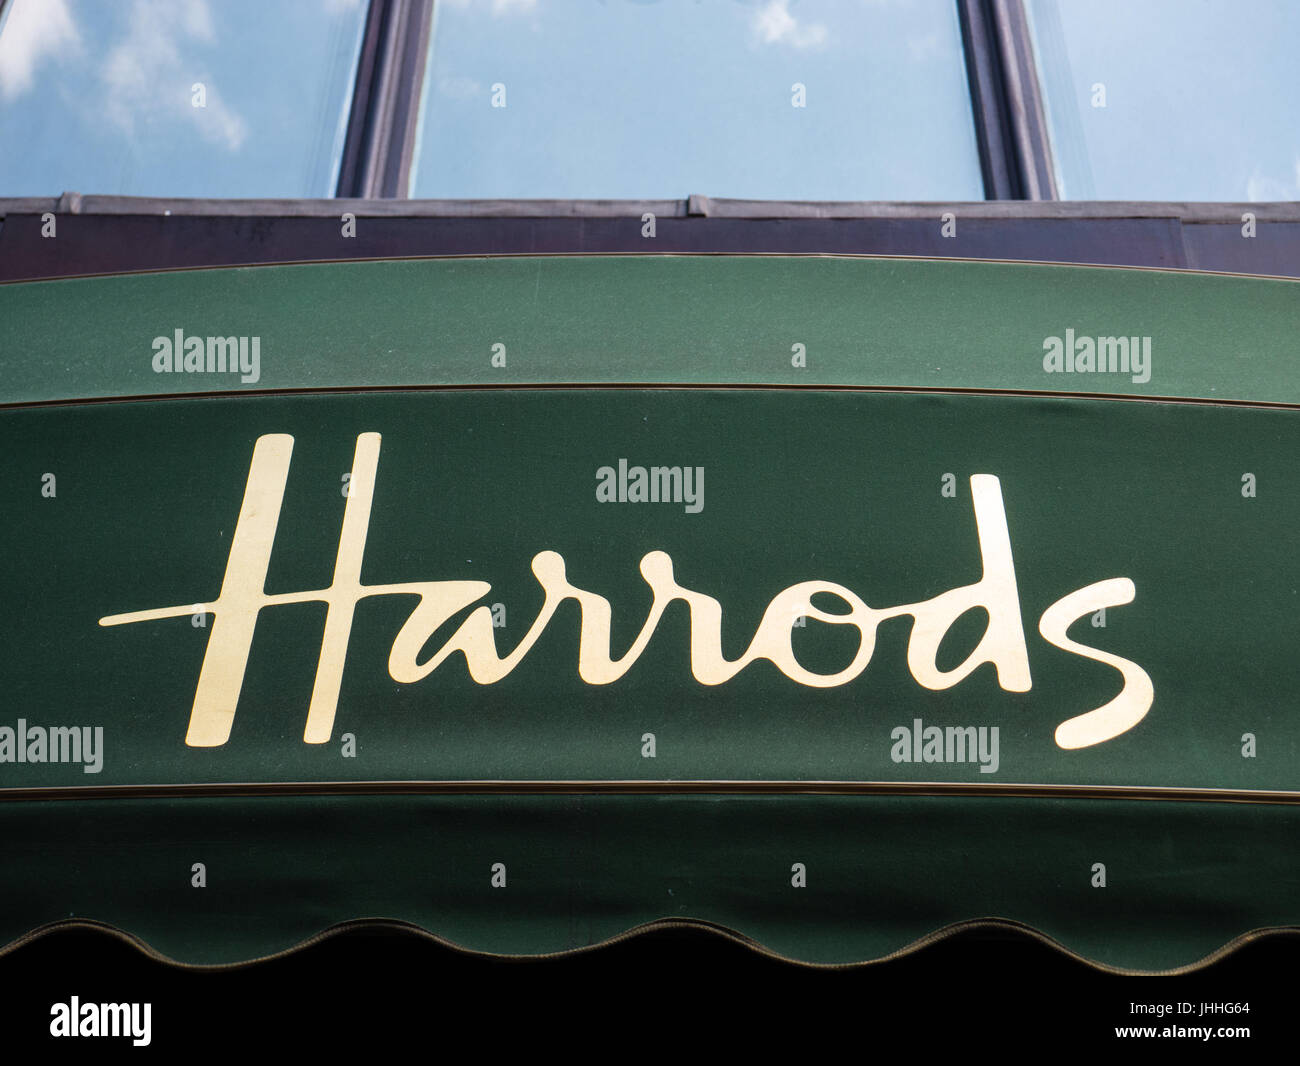 Harrods Department Store, Londres, Angleterre, Royaume-Uni, GB. Banque D'Images